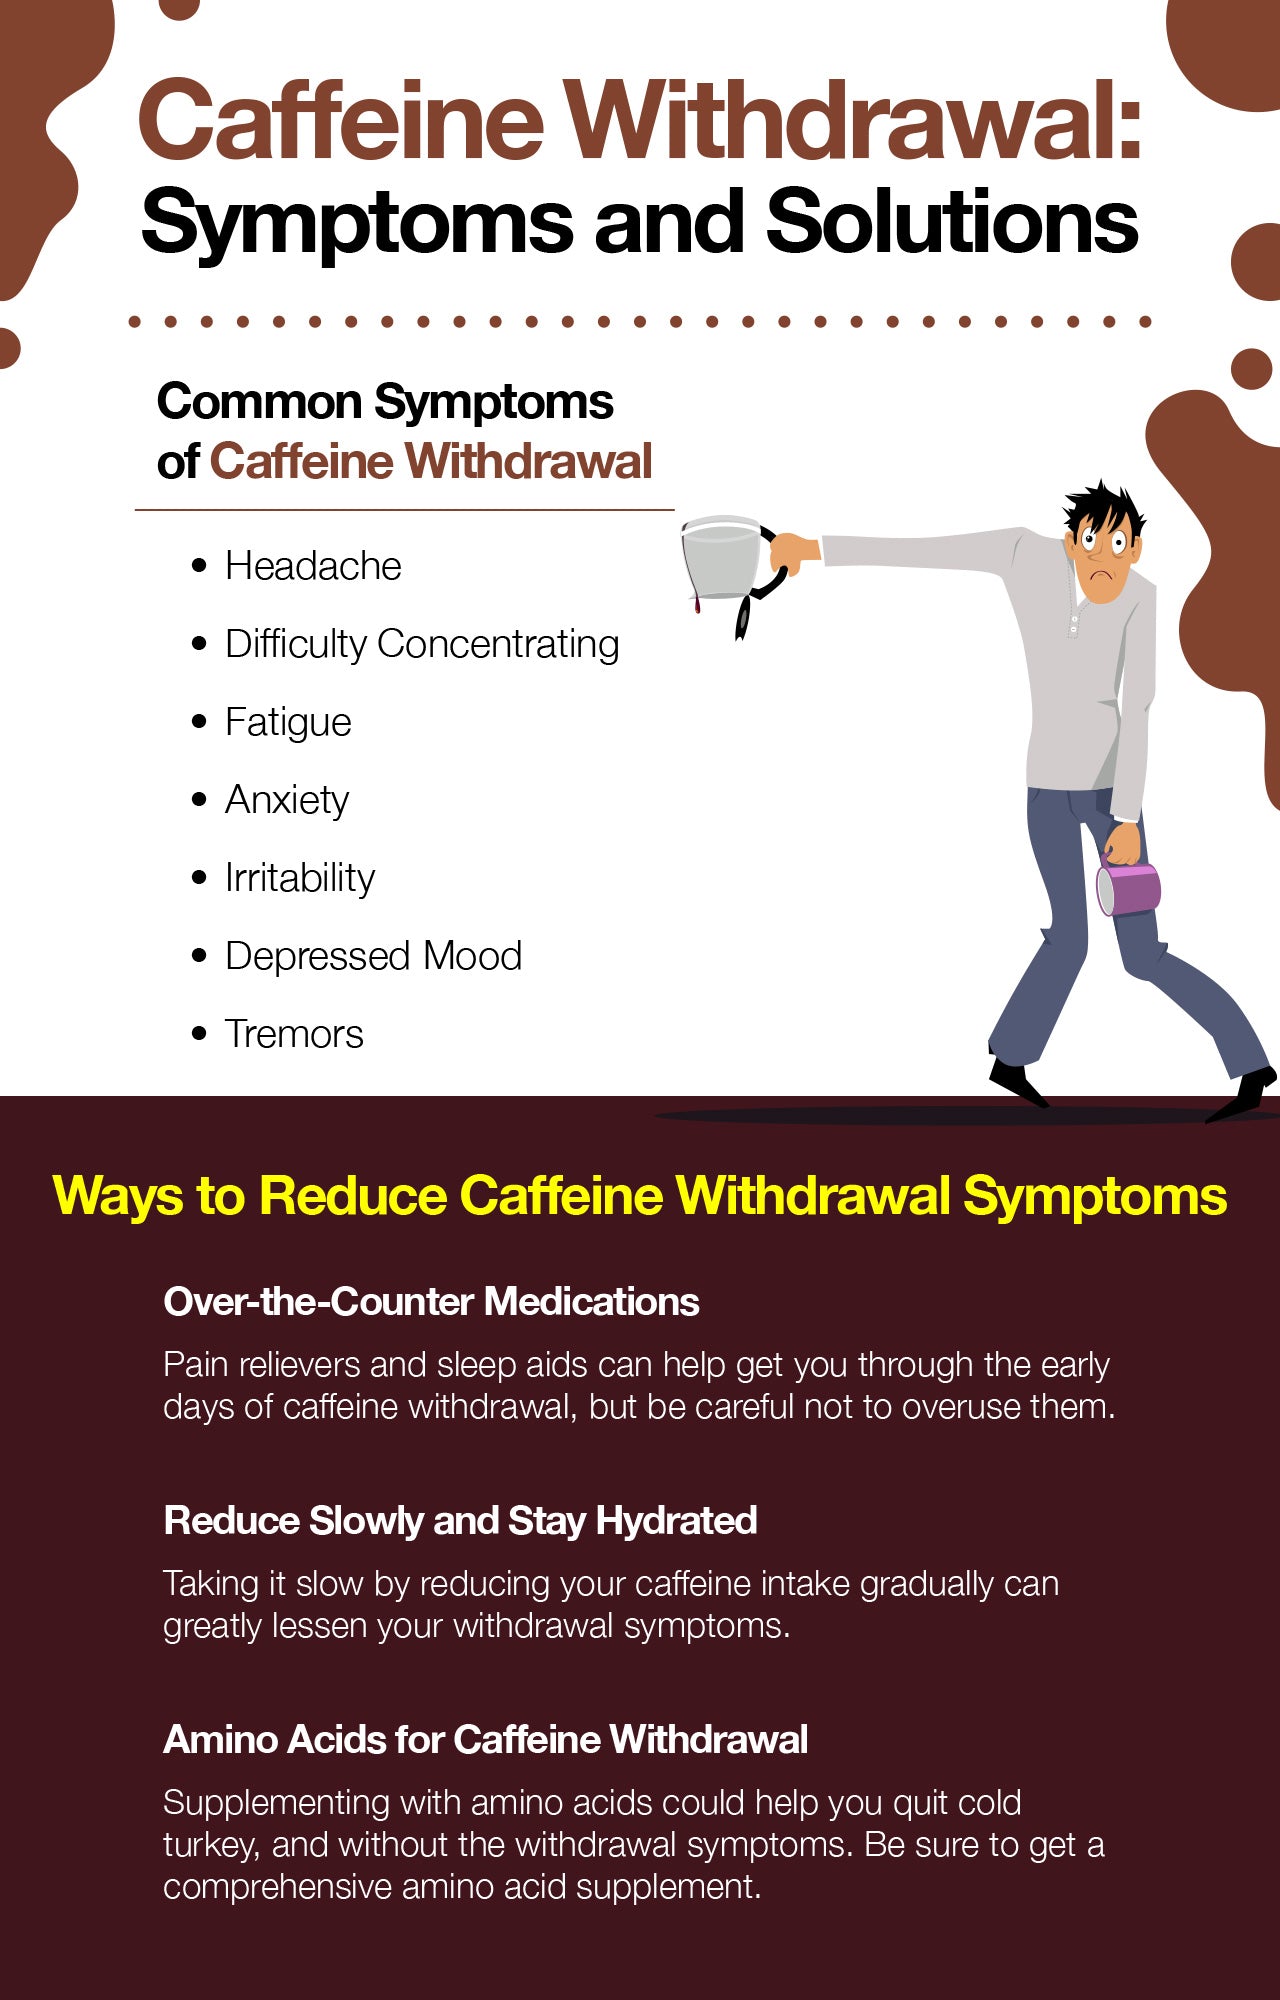 Can You Die from Caffeine Withdrawal?